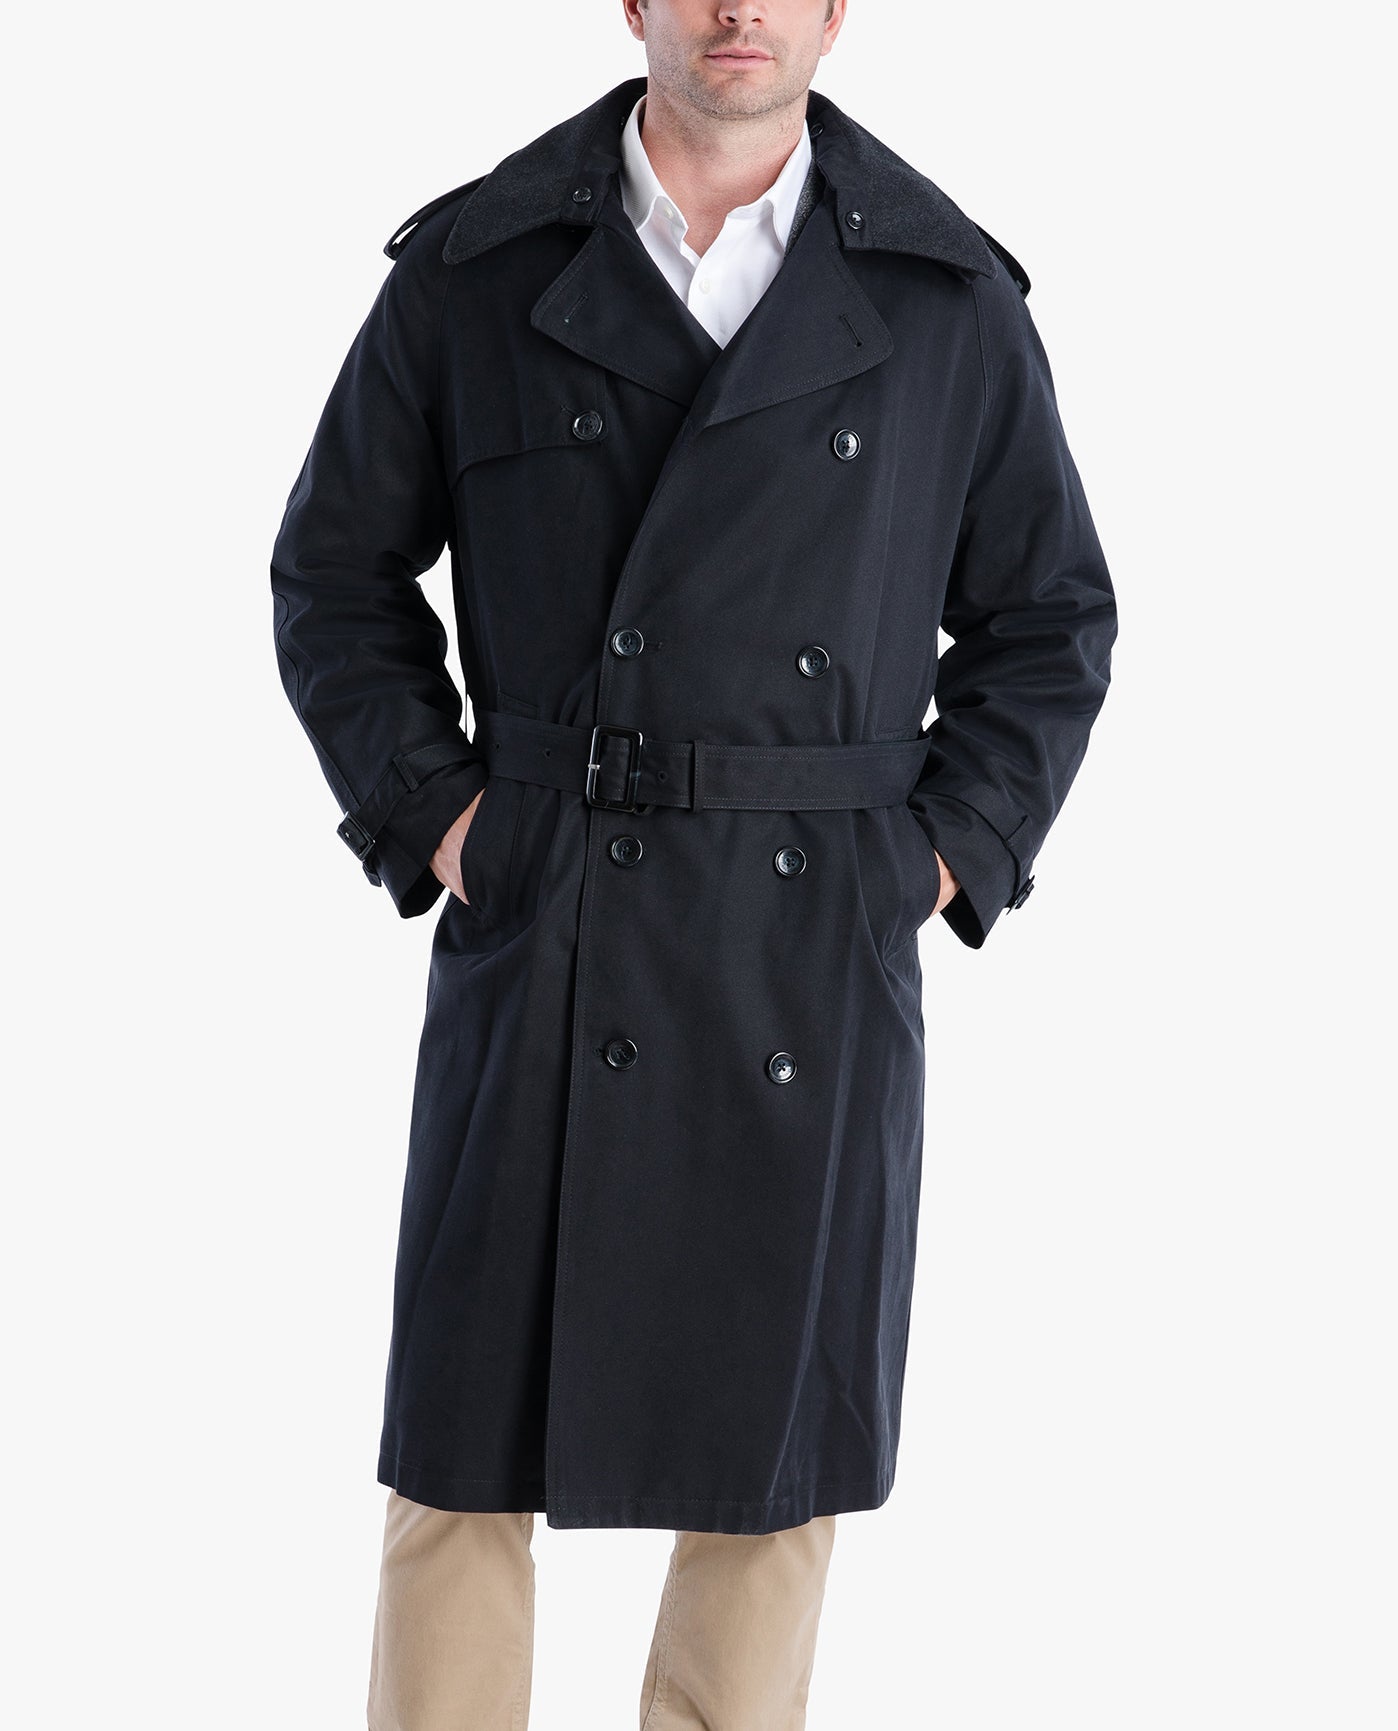 ALT VIEW OF CLASSIC DOUBLE BREASTED TRENCH COAT | BLACK